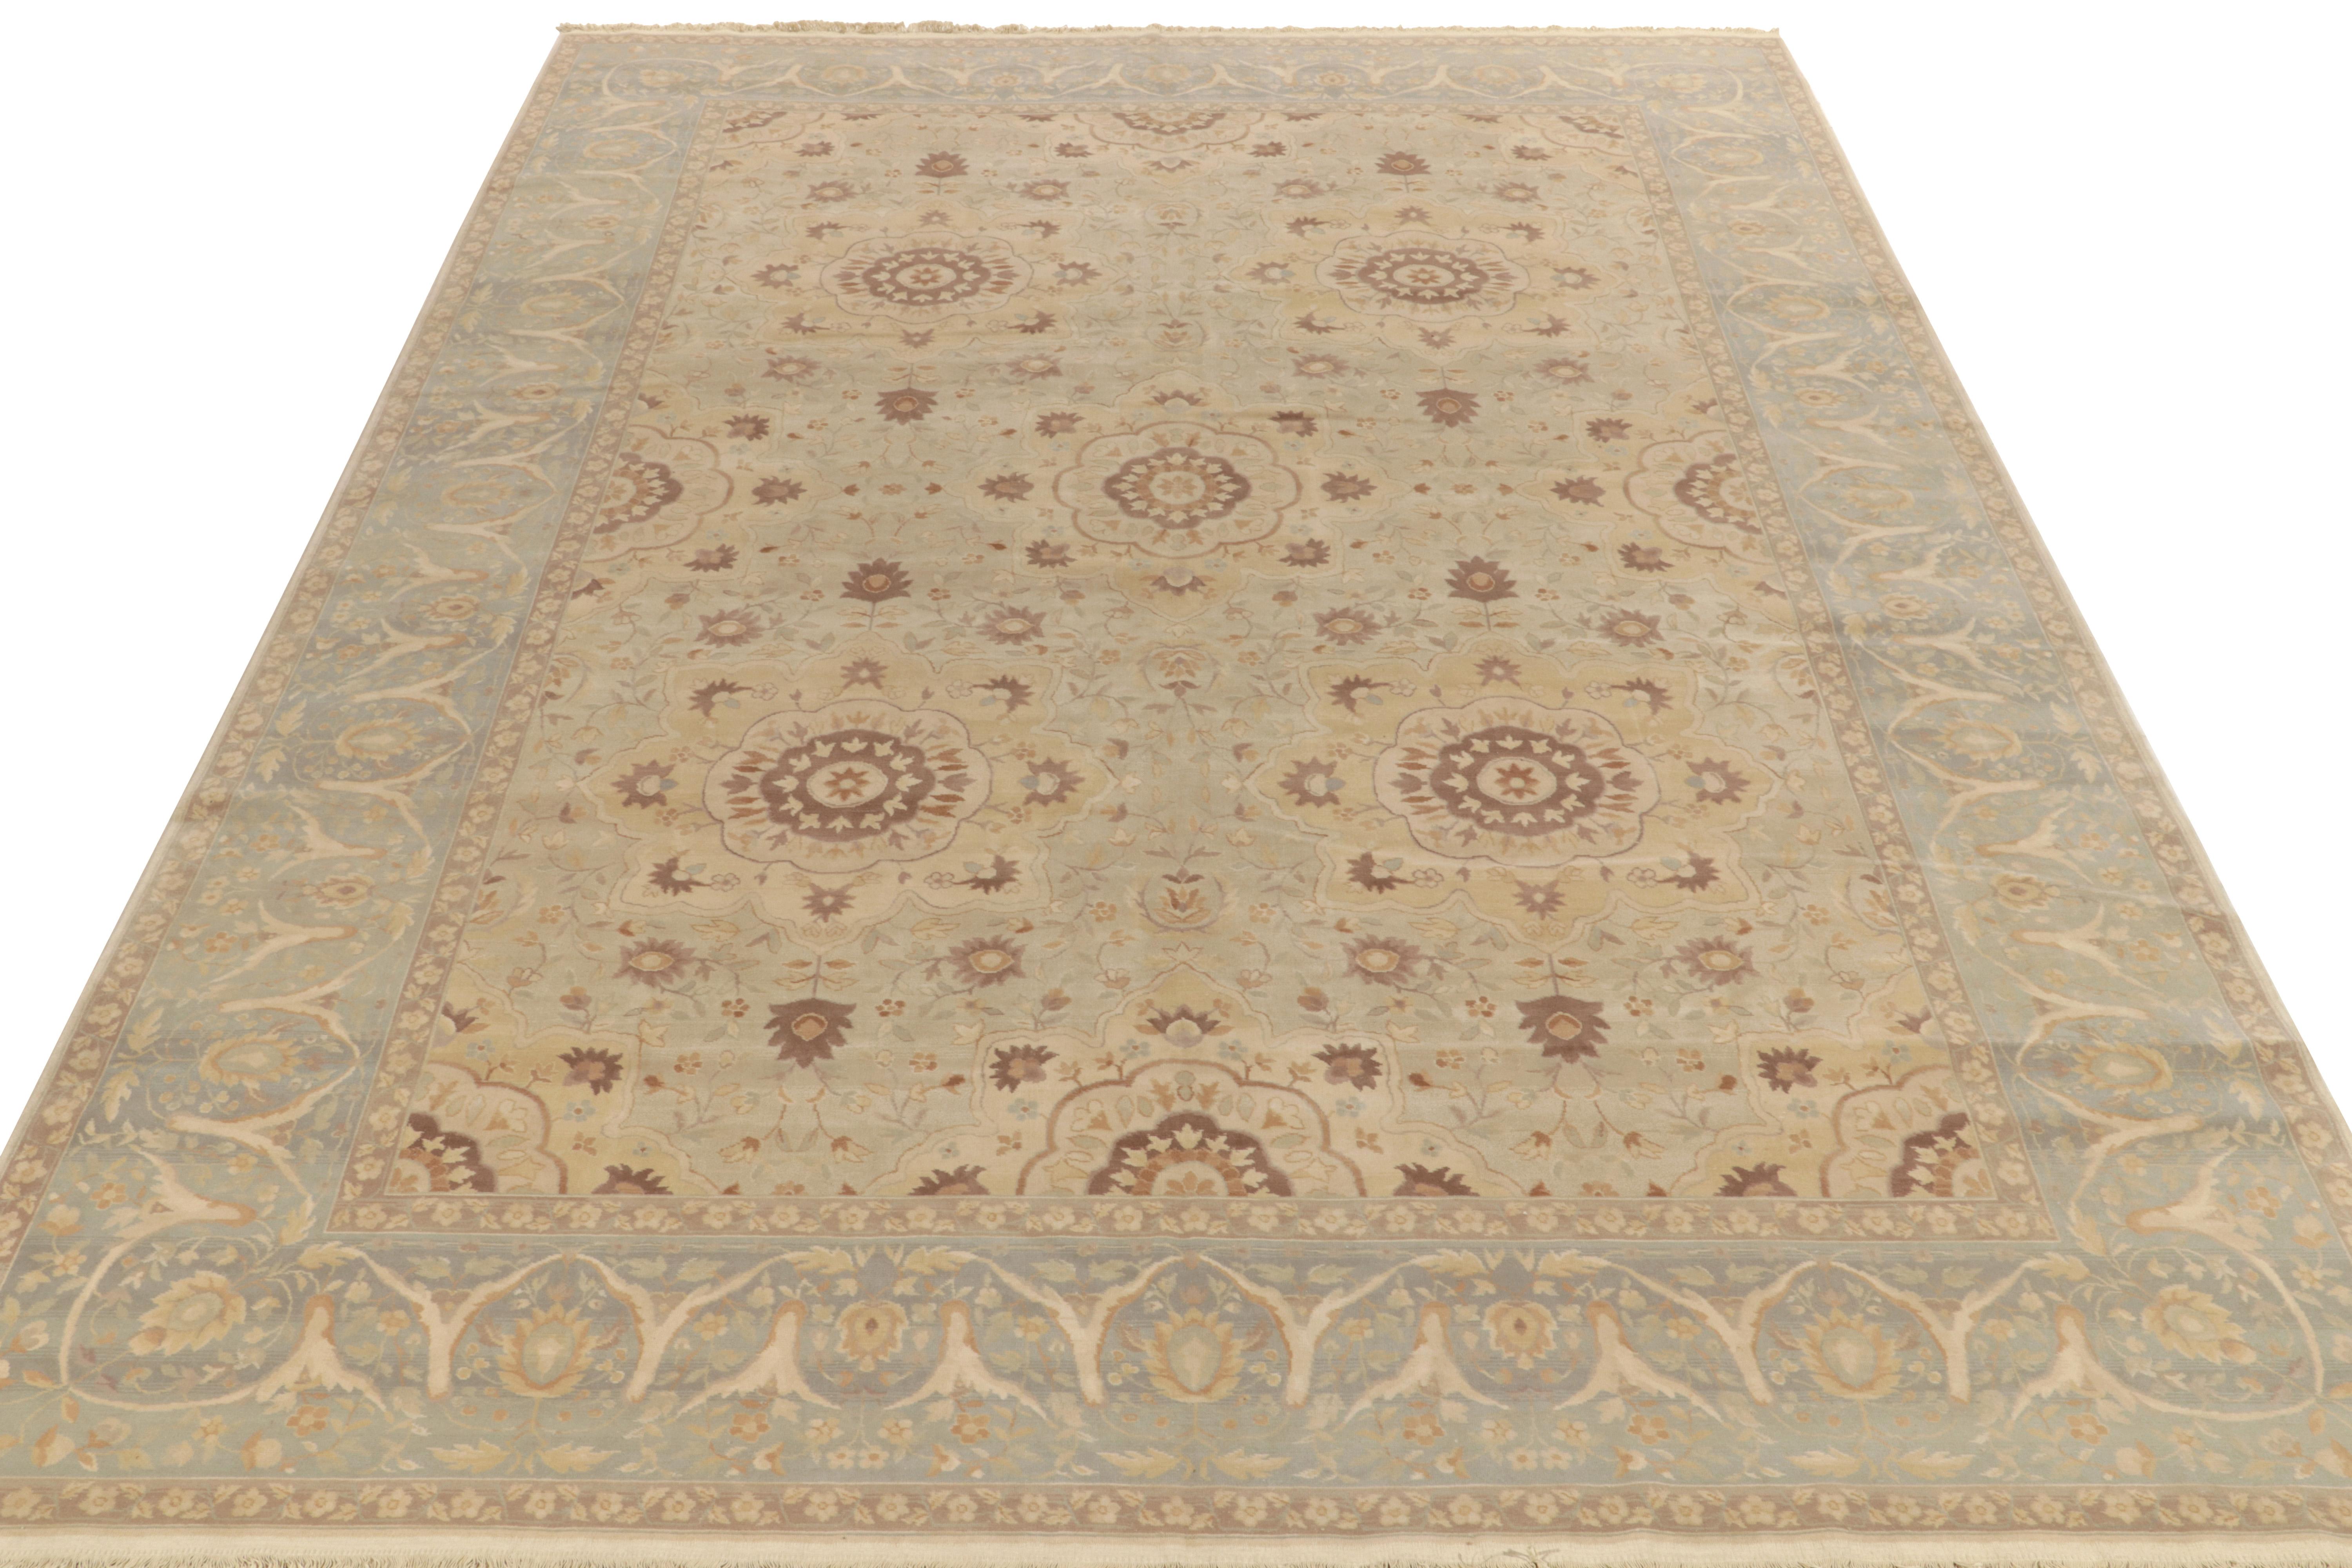 Belonging to Rug & Kilim’s Modern Classics collection, an intricate Sultanabad style rug taking after neoclassical Persian sensibilities. The subtle floral medallion pattern plays beautifully with uniquely soft tones of beige & brown cocooned in